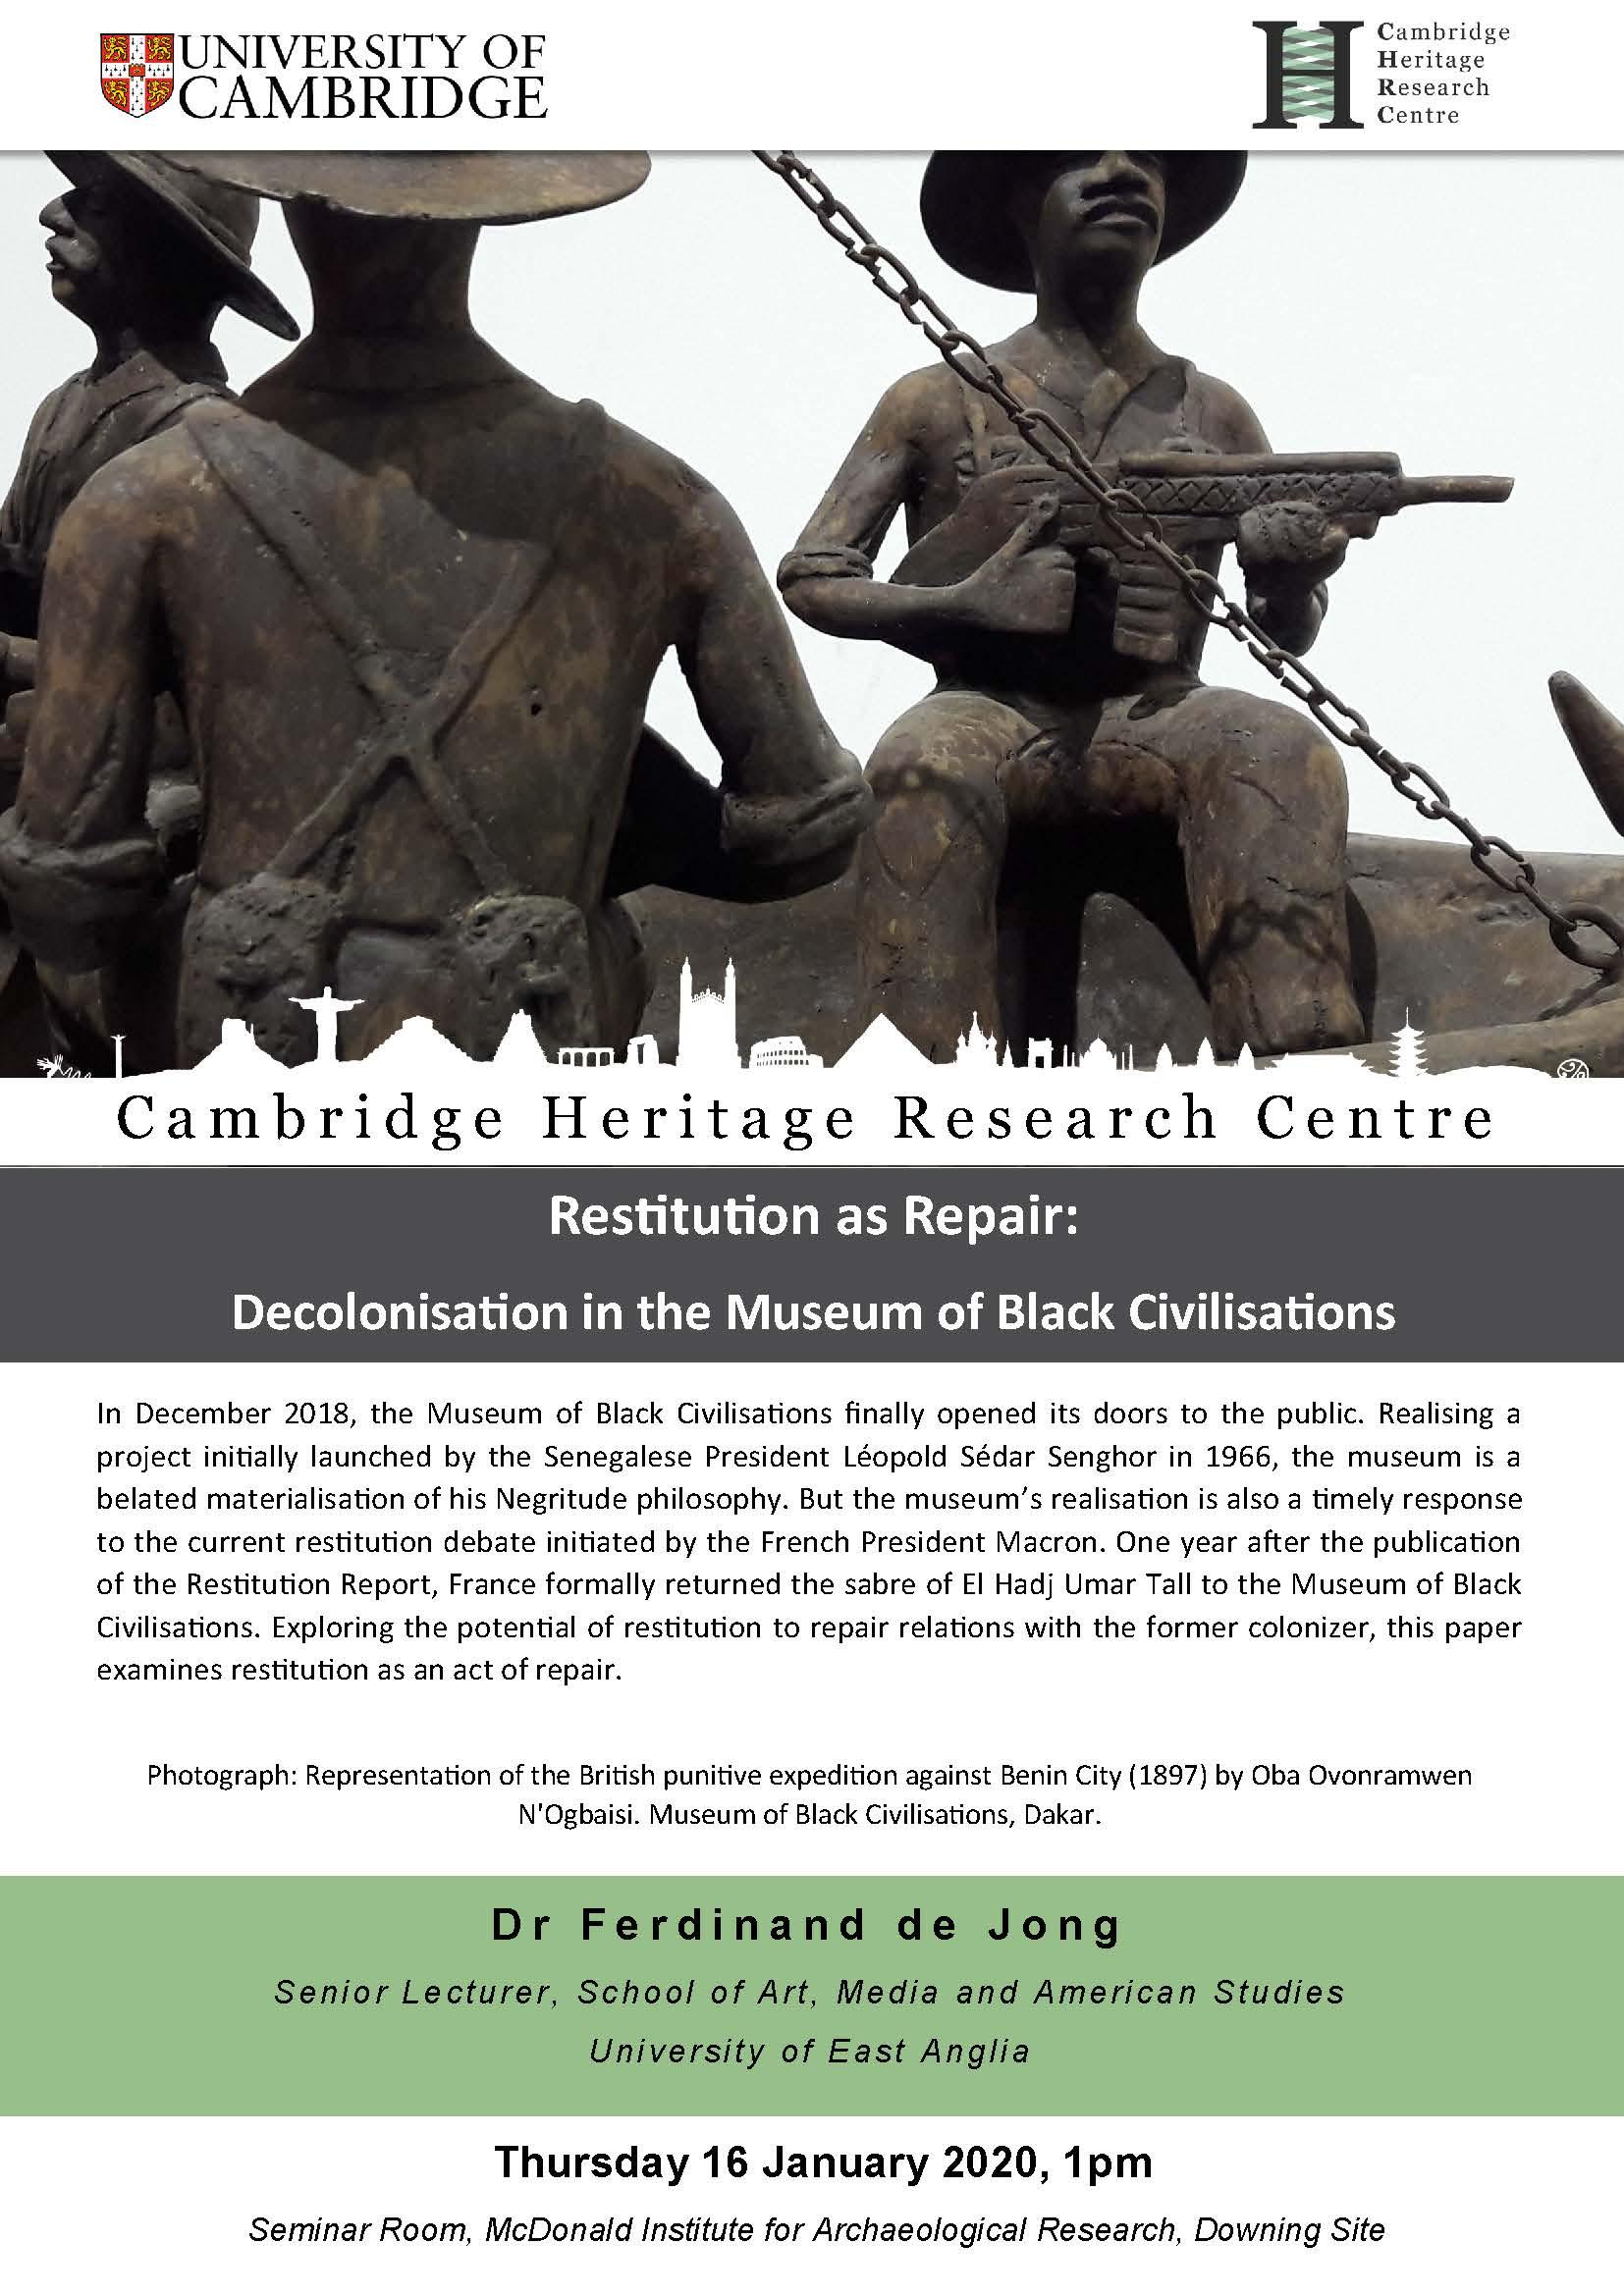  Decolonisation in the Museum of Black Civilisations